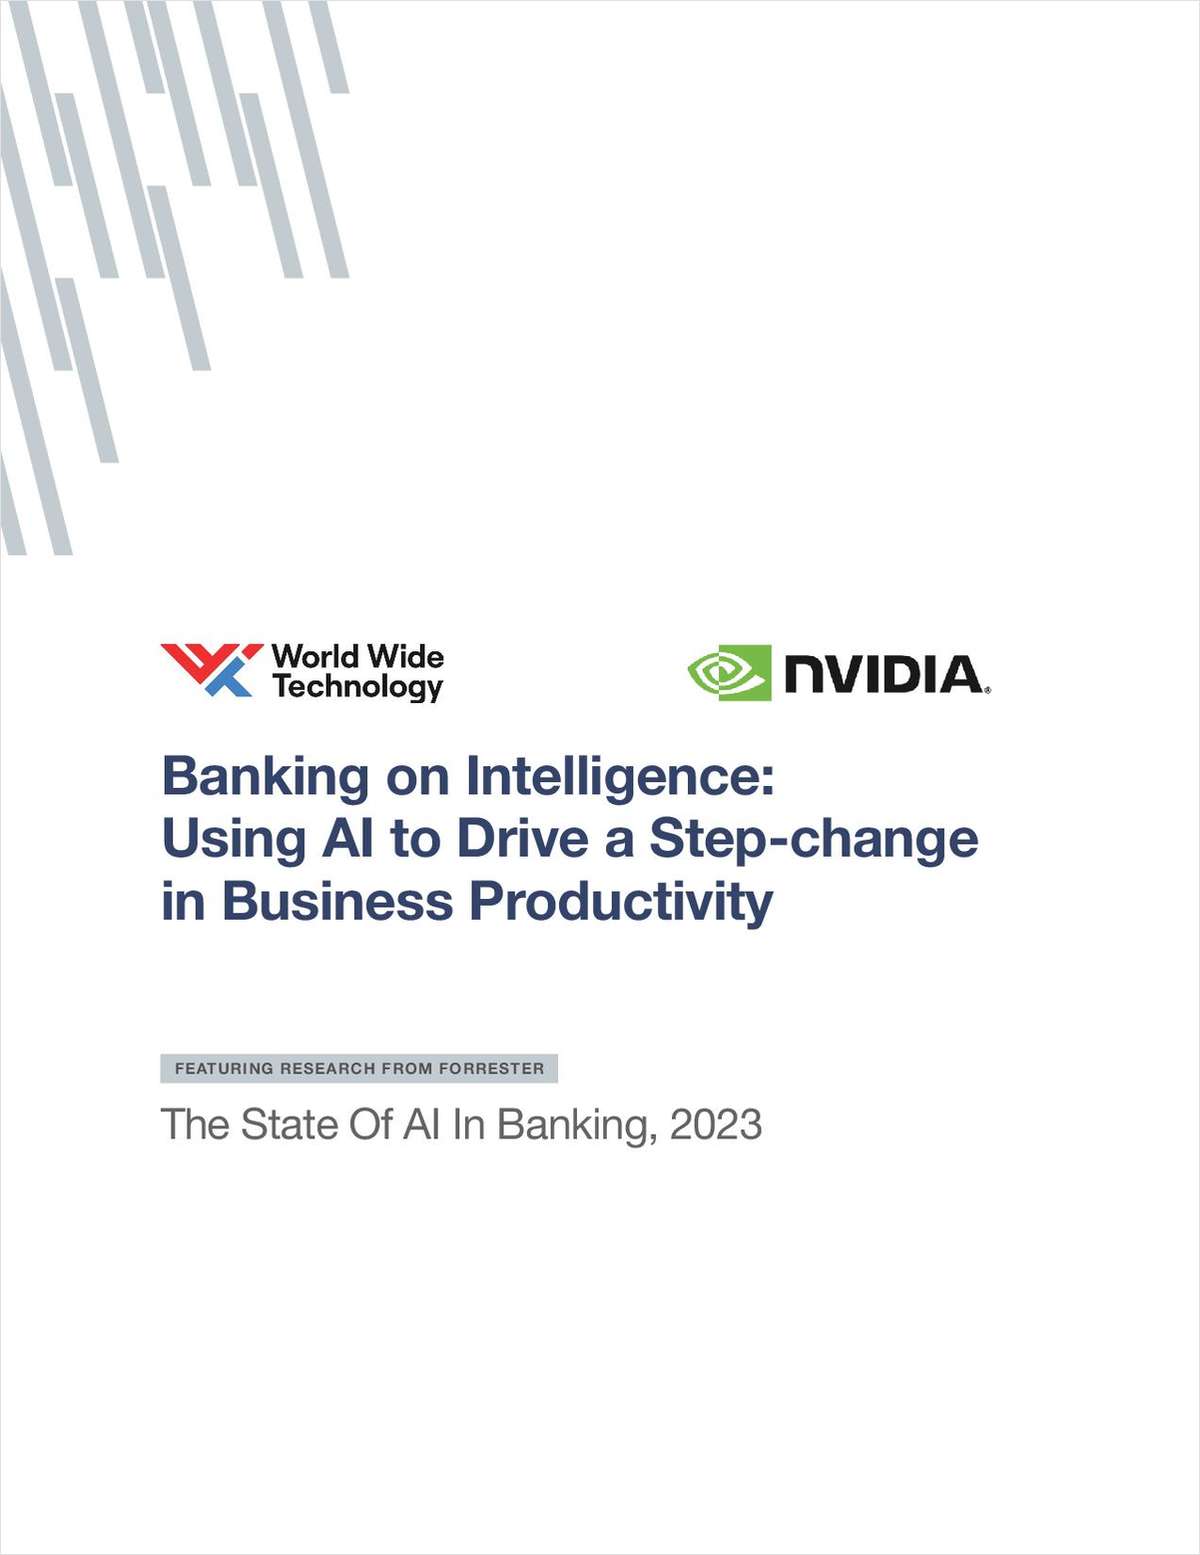 Report: The state of AI in banking, featuring research from Forrester